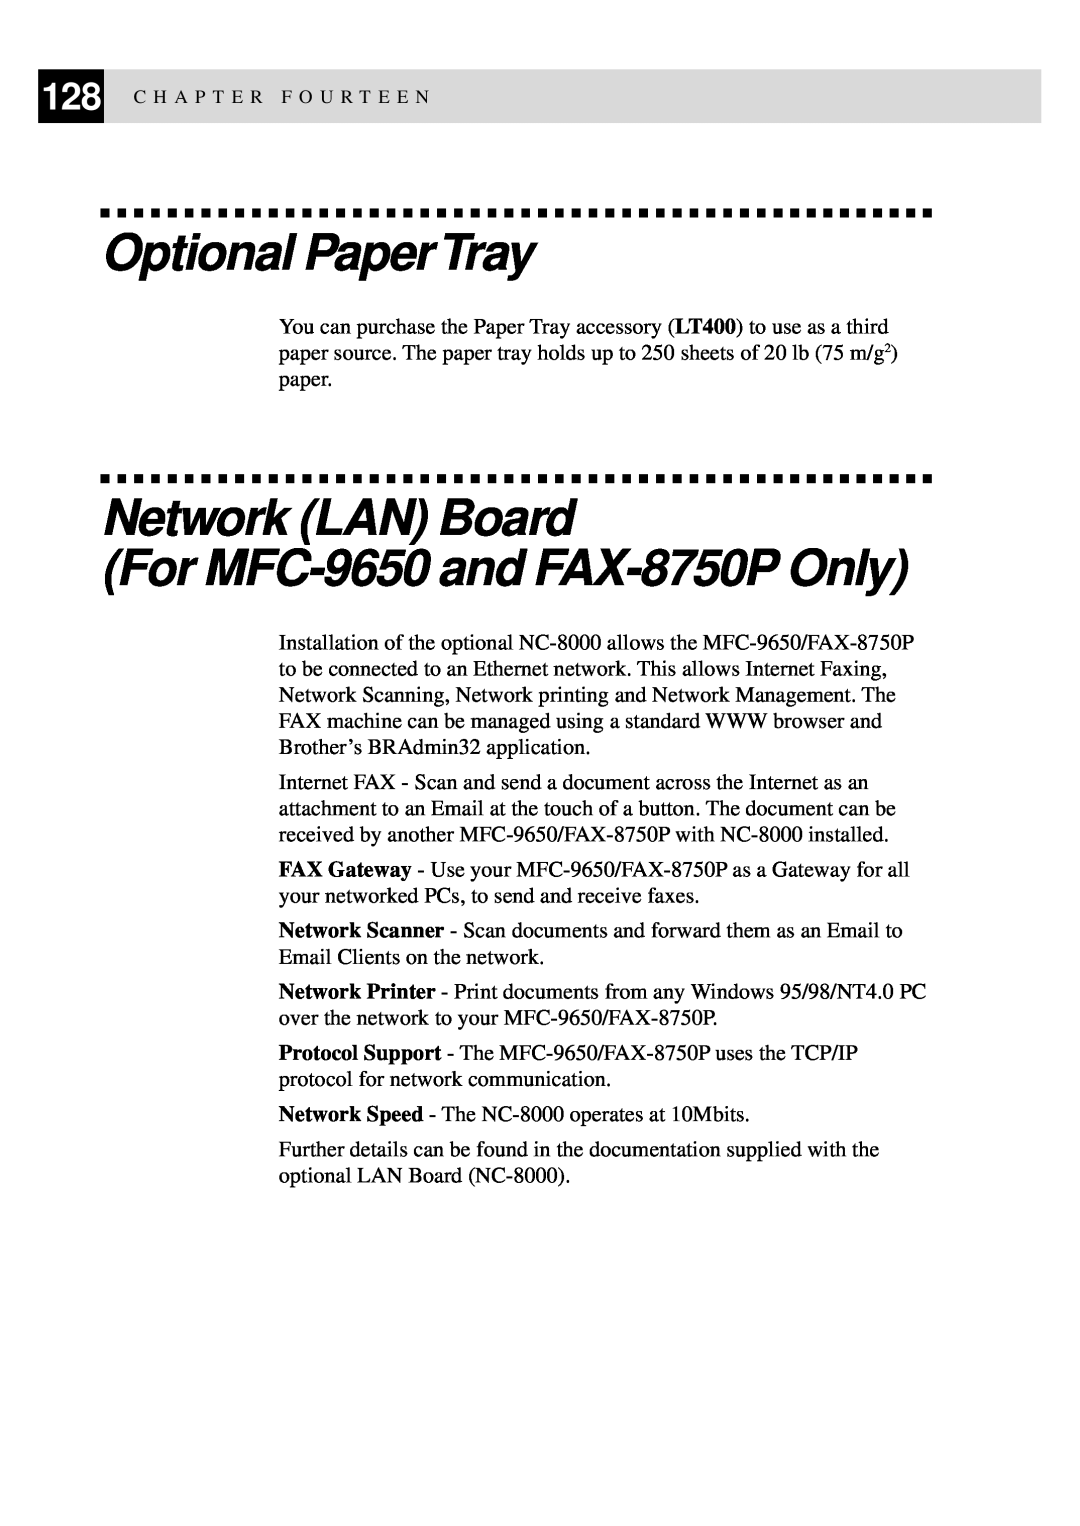 Brother FAX-8350P owner manual Optional PaperTray, Network LAN Board For MFC-9650 and FAX-8750P Only 